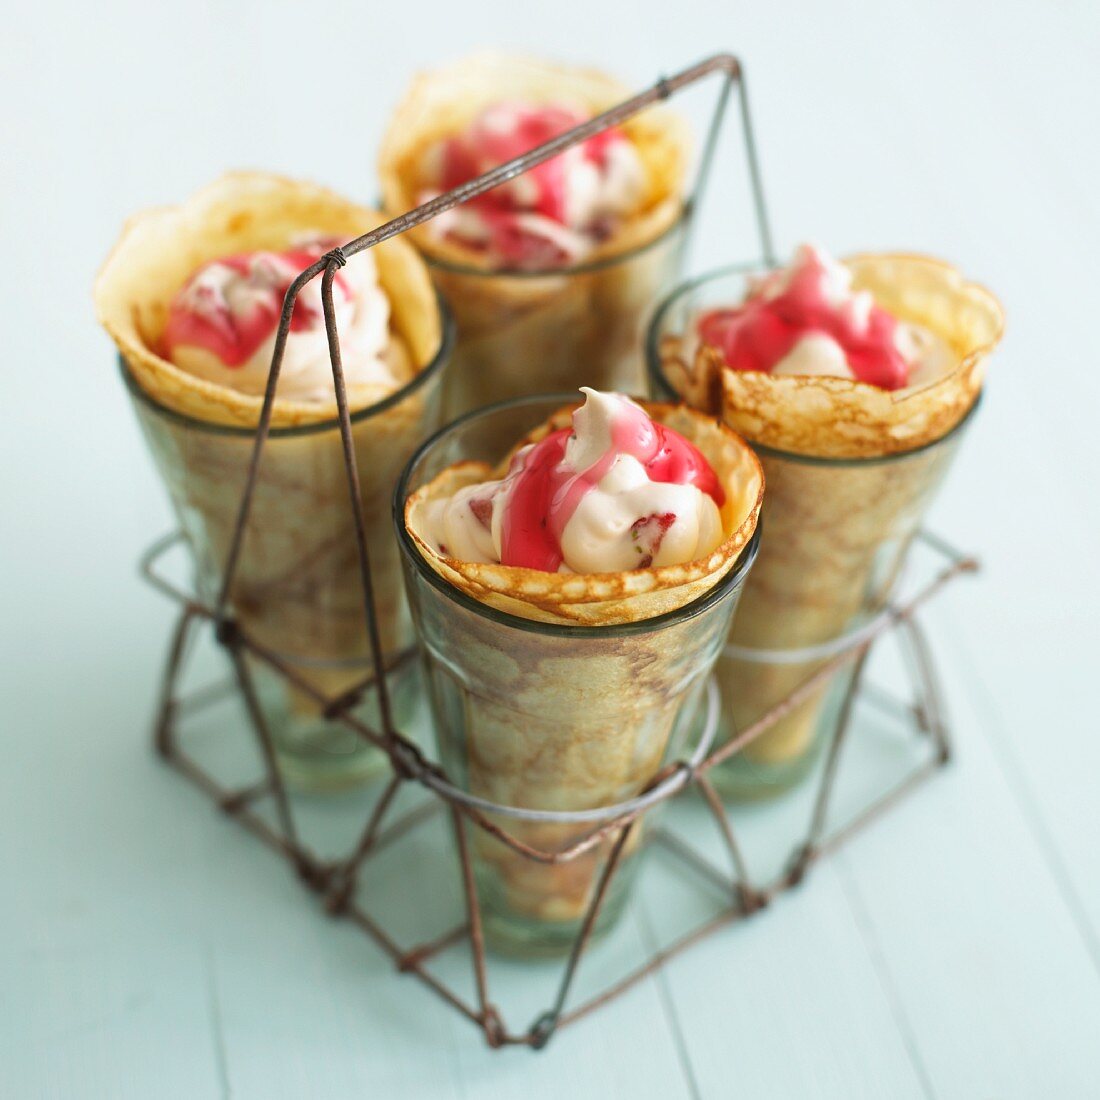 Pancake wraps with strawberry mousse